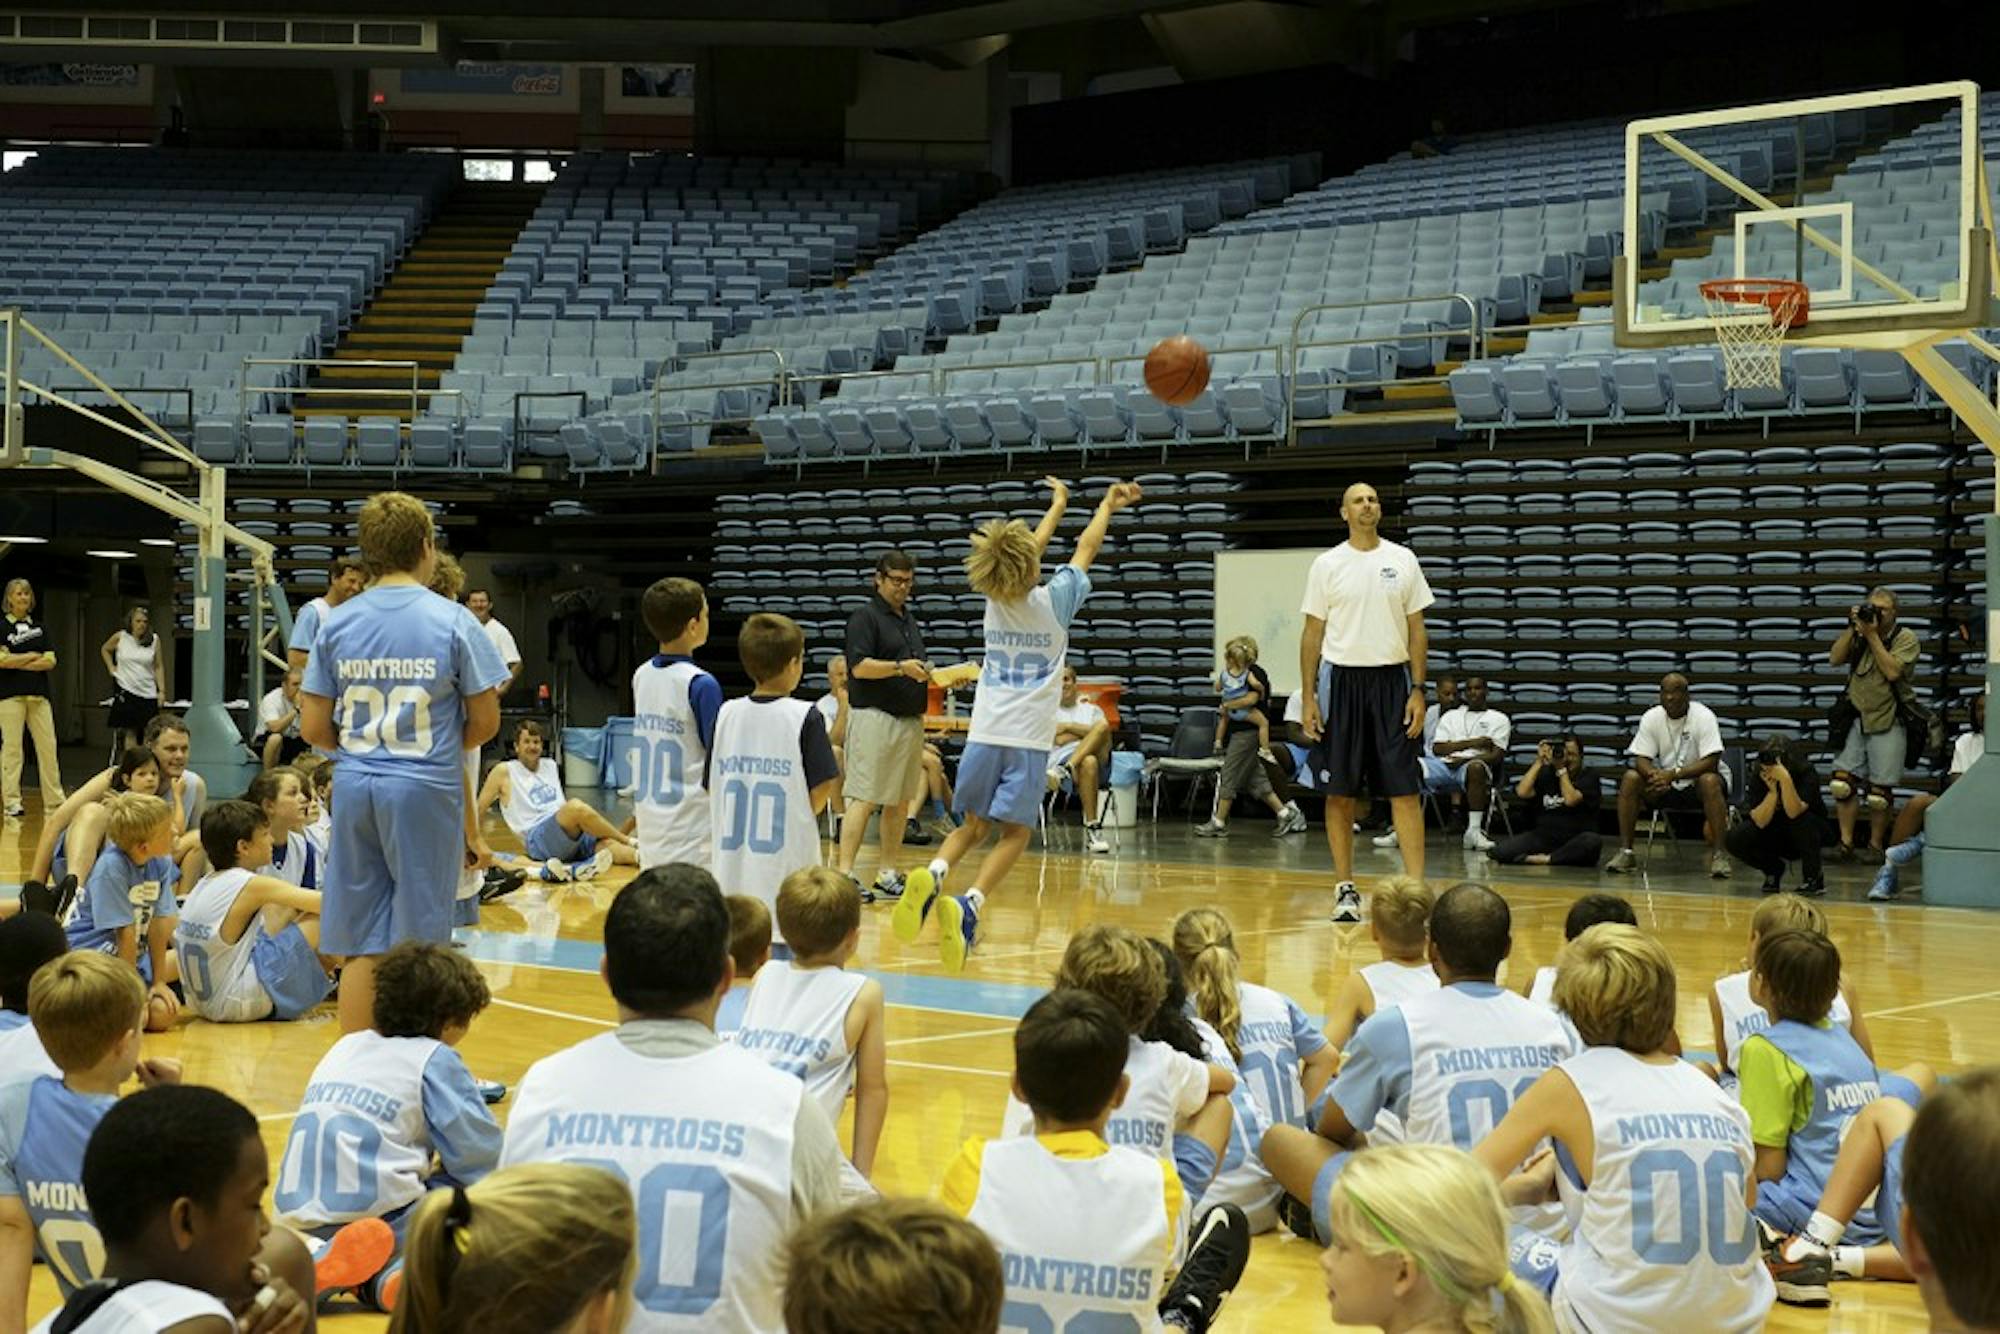 Eric Montross overlooks a free throw competition at the Eric Montross Father's Day Basketball Camp.